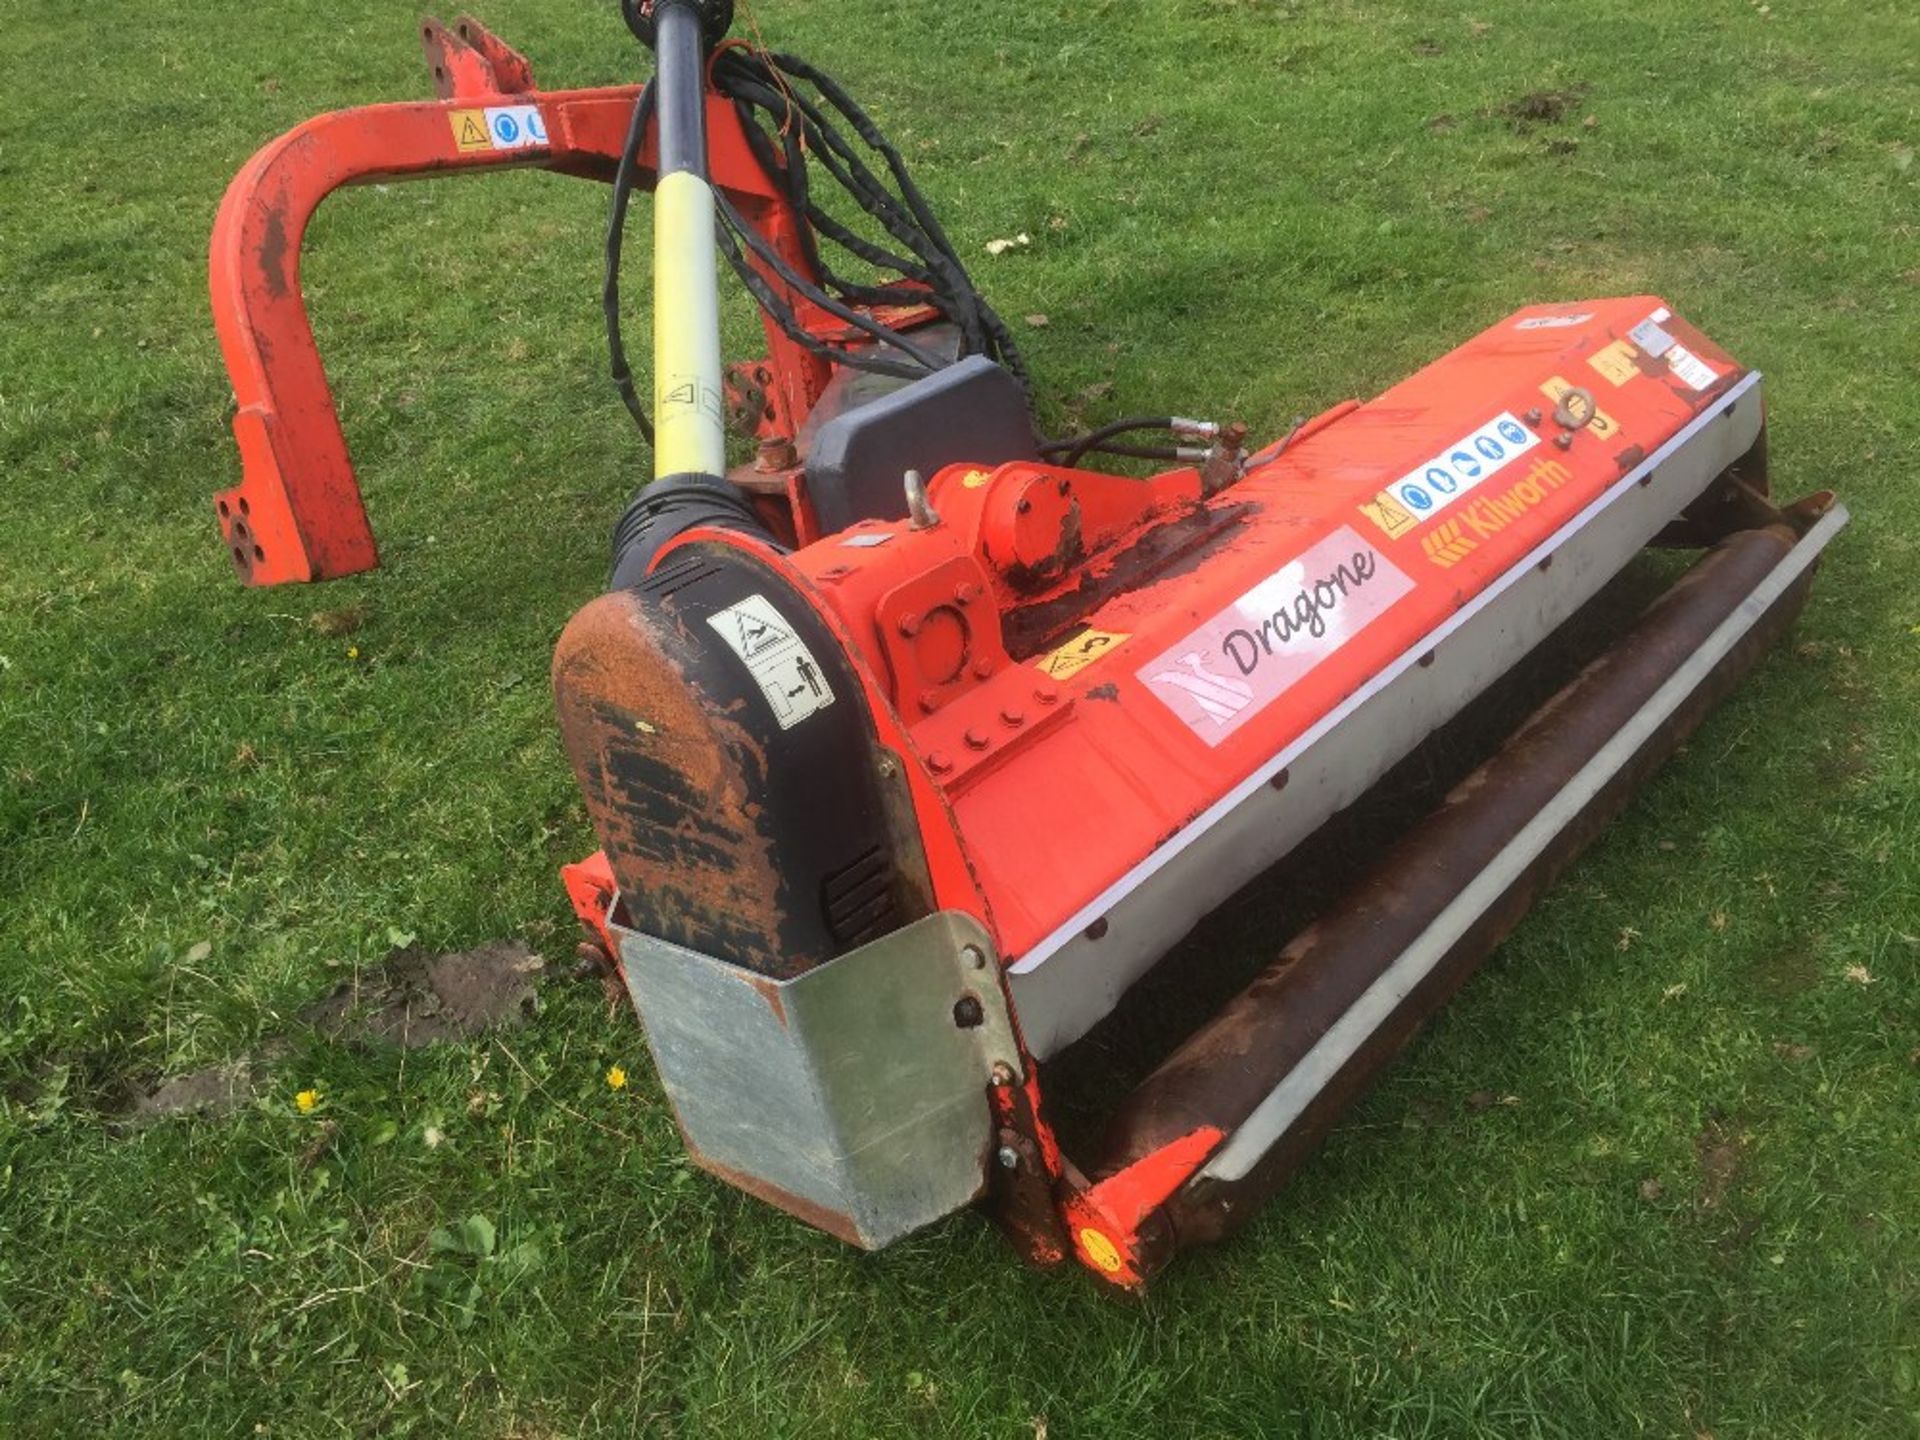 Kilworth verge mower, year 2002. Stored near Reading. No VAT on this item. - Image 2 of 4